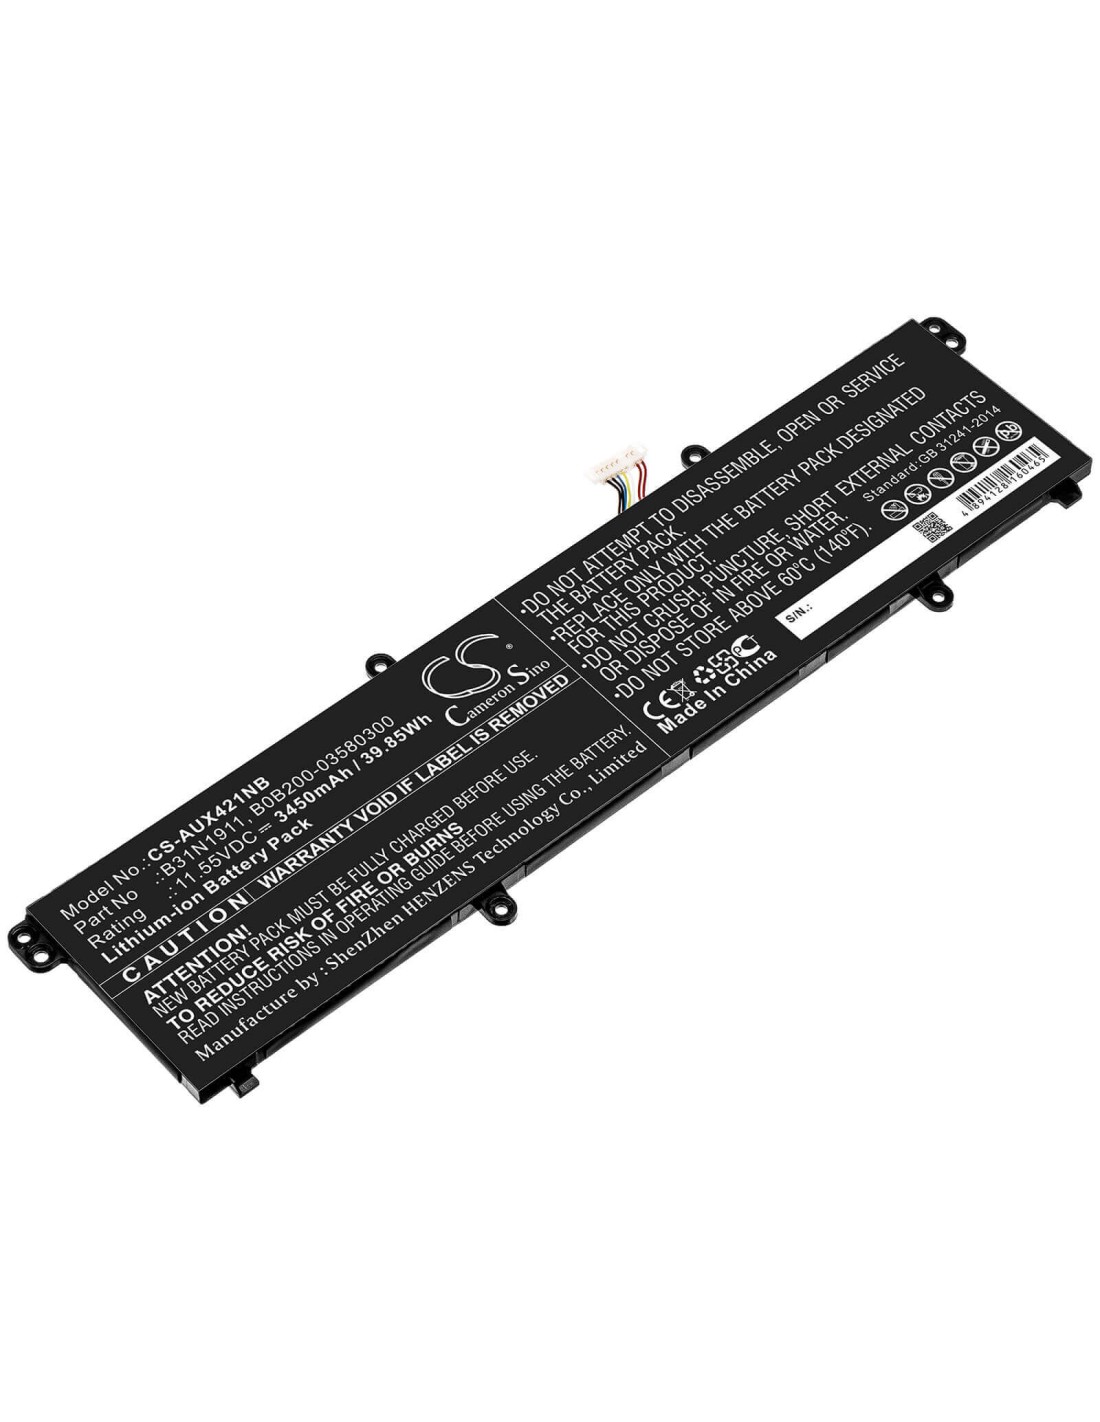 Battery for Asus, A413ff, F413ff, K433fa 11.55V, 3450mAh - 39.85Wh